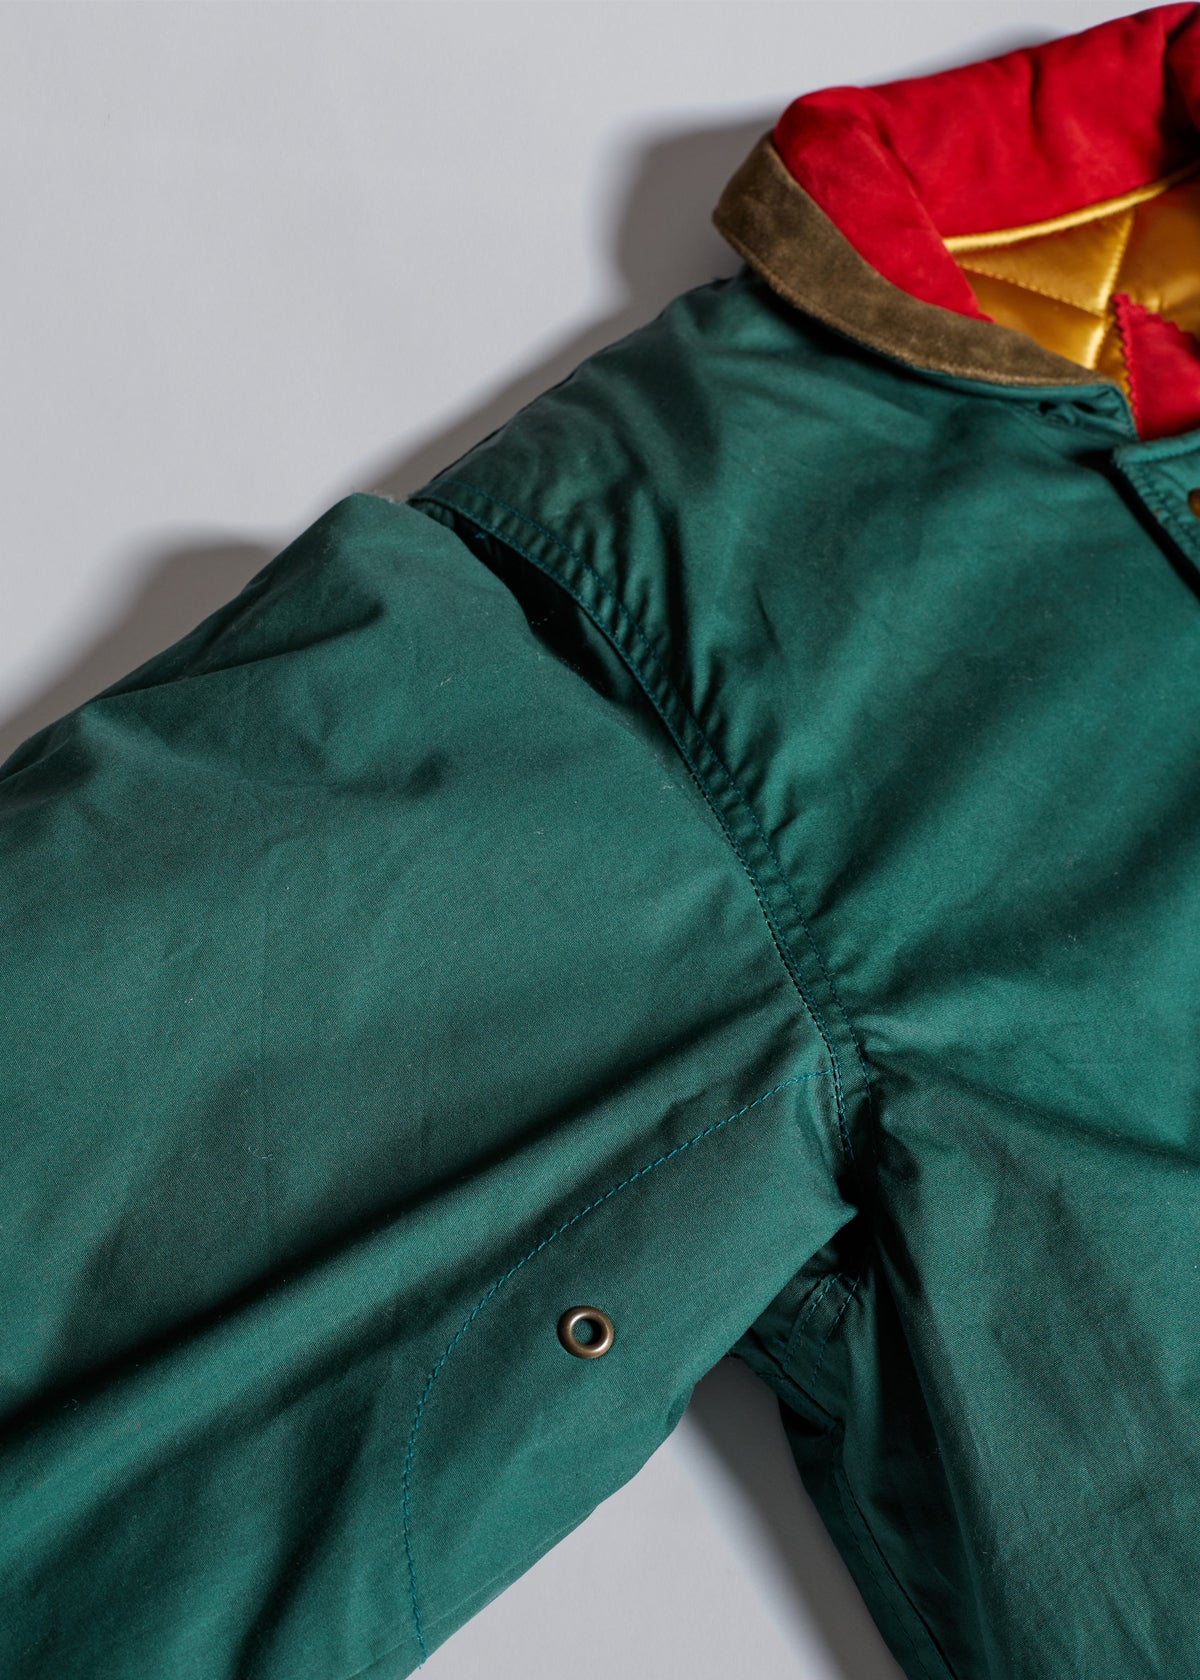 Quilted Lining Bomber Jacket AW1982 - 48IT - The Archivist Store